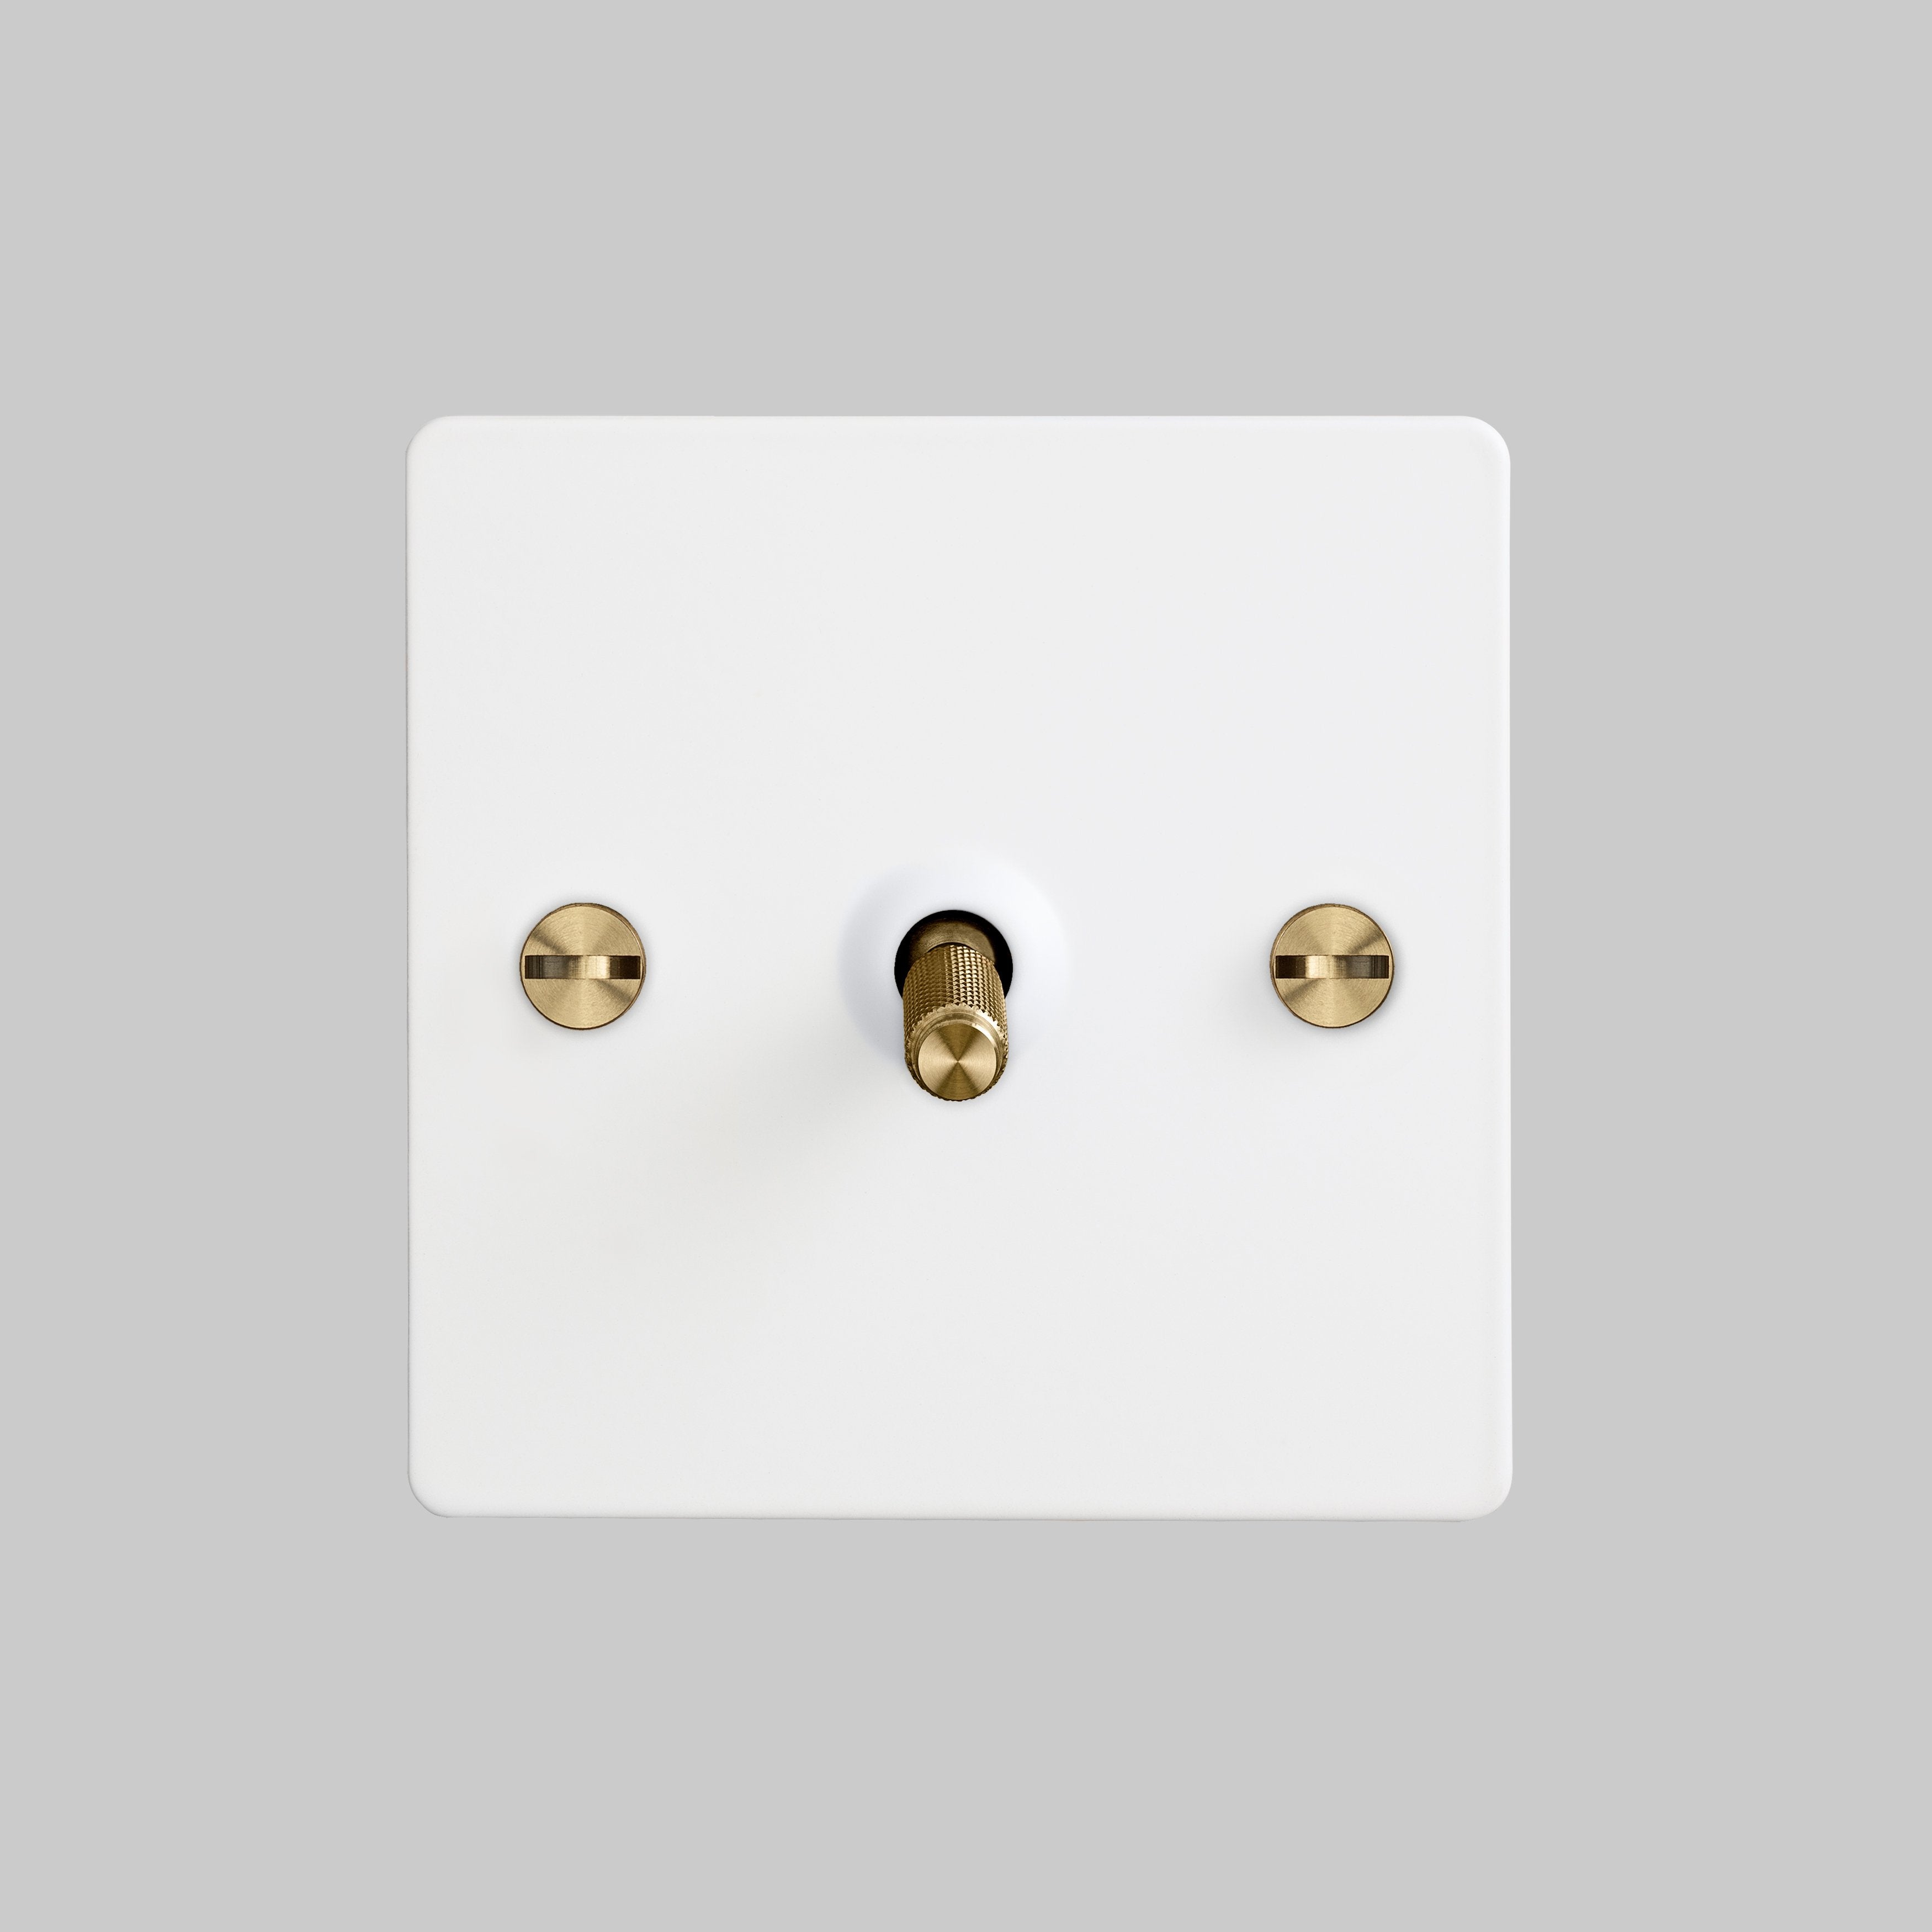 Buster and Punch 1G TOGGLE SWITCH / WHITE / BRASS